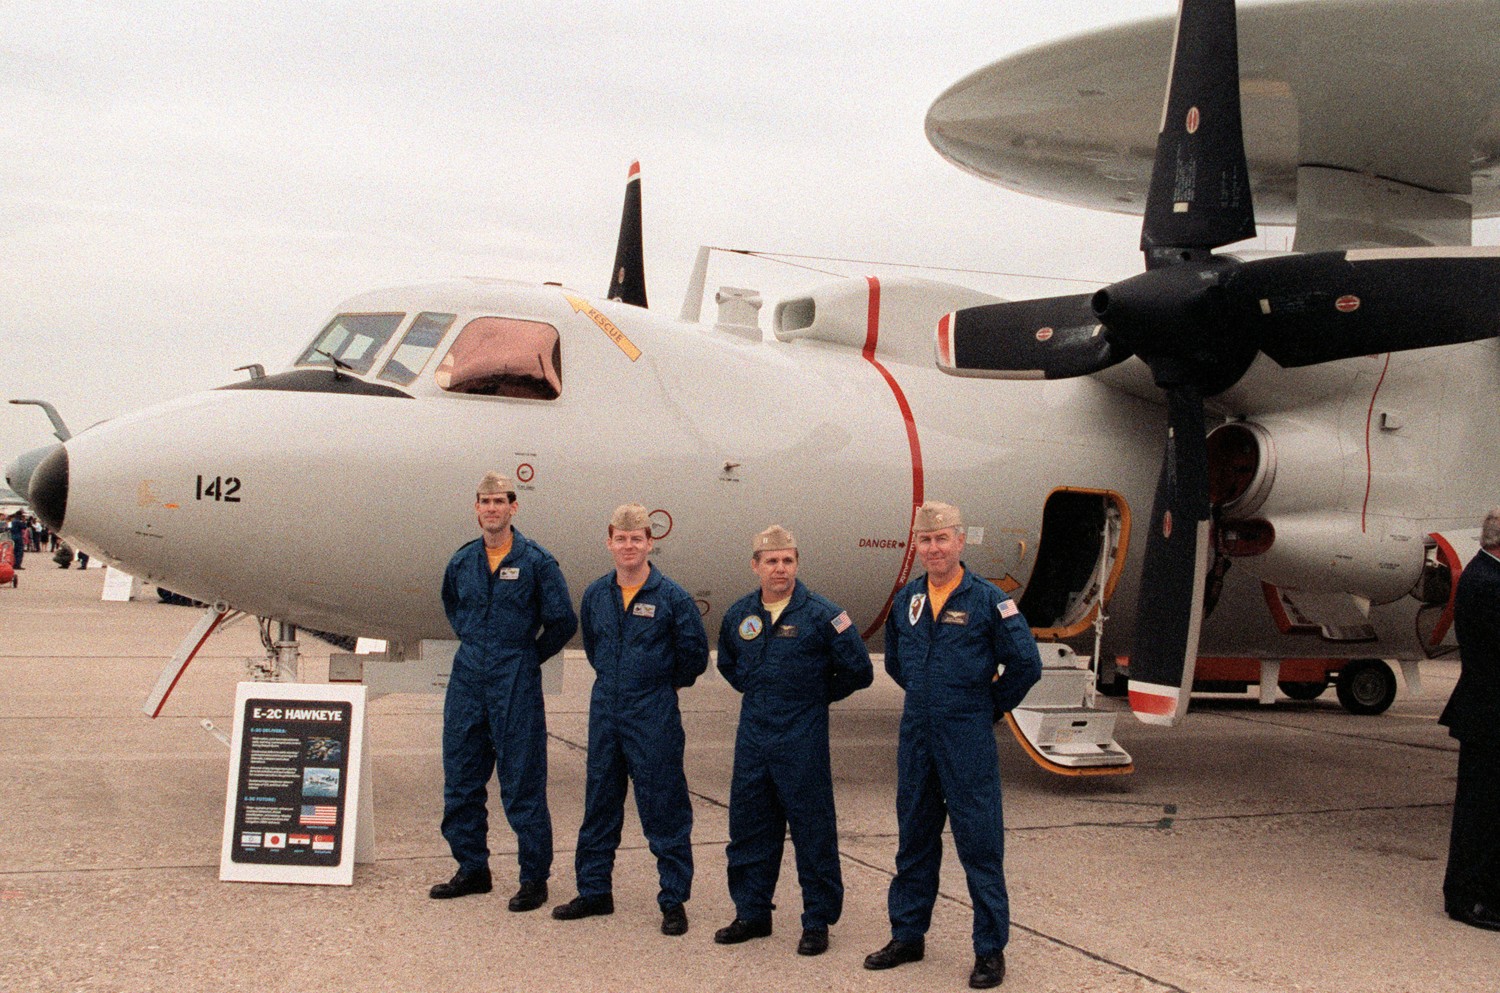 vaw-122 steeljaws carrier airborne early warning squadron e-2c hawkeye us navy paris air show 1991 03